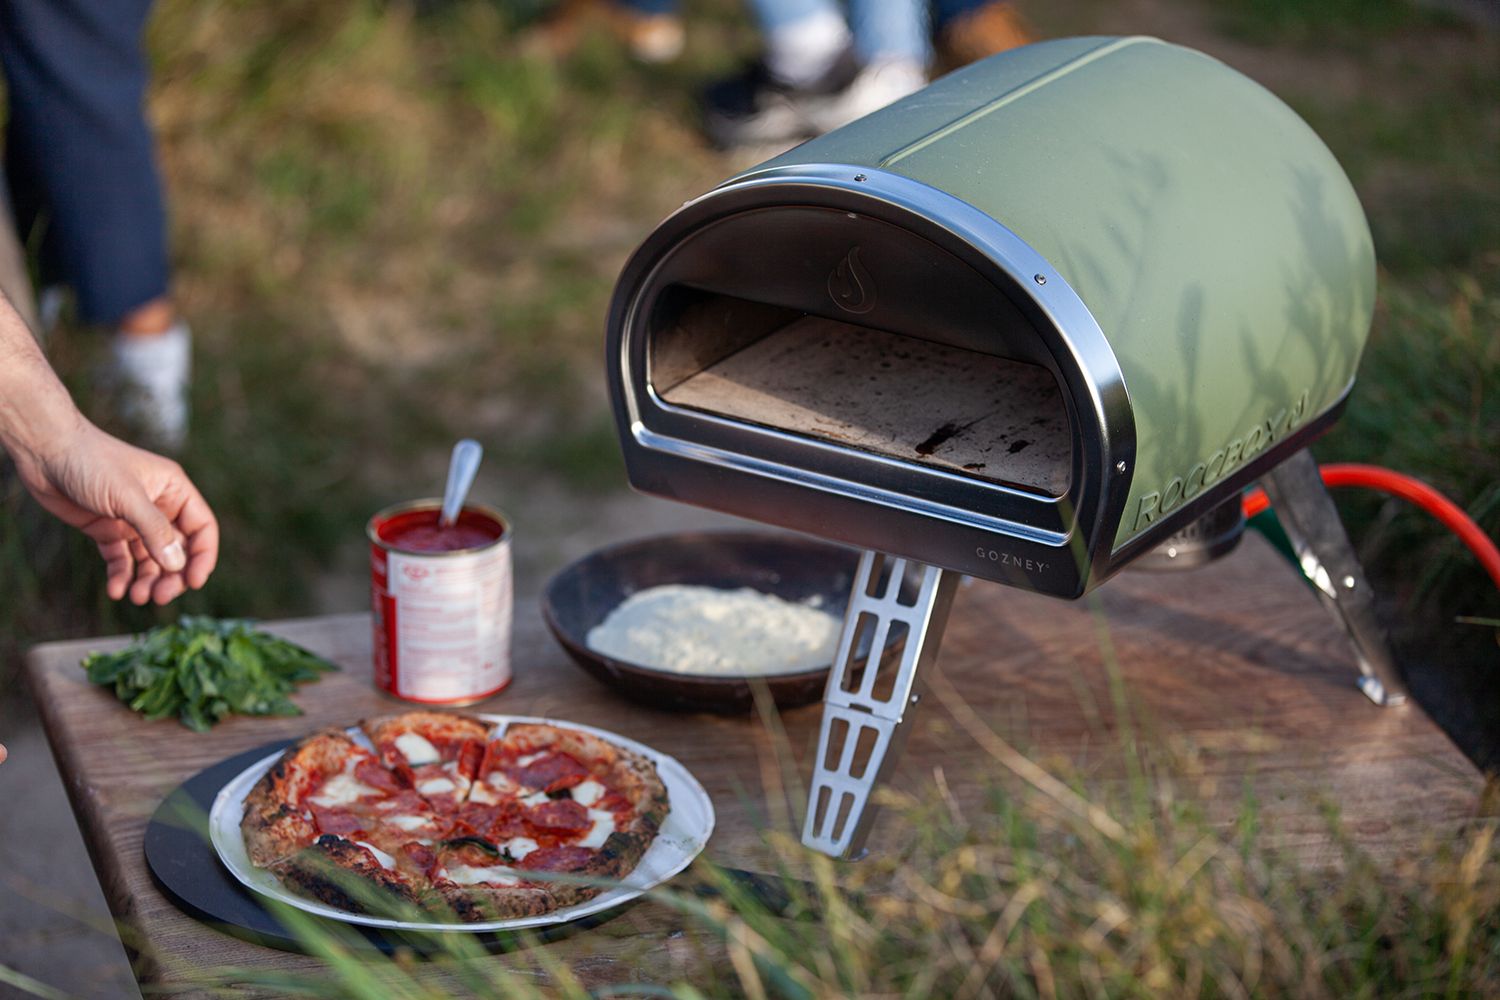 Image of a green Roccbox pizz oven on a garden table